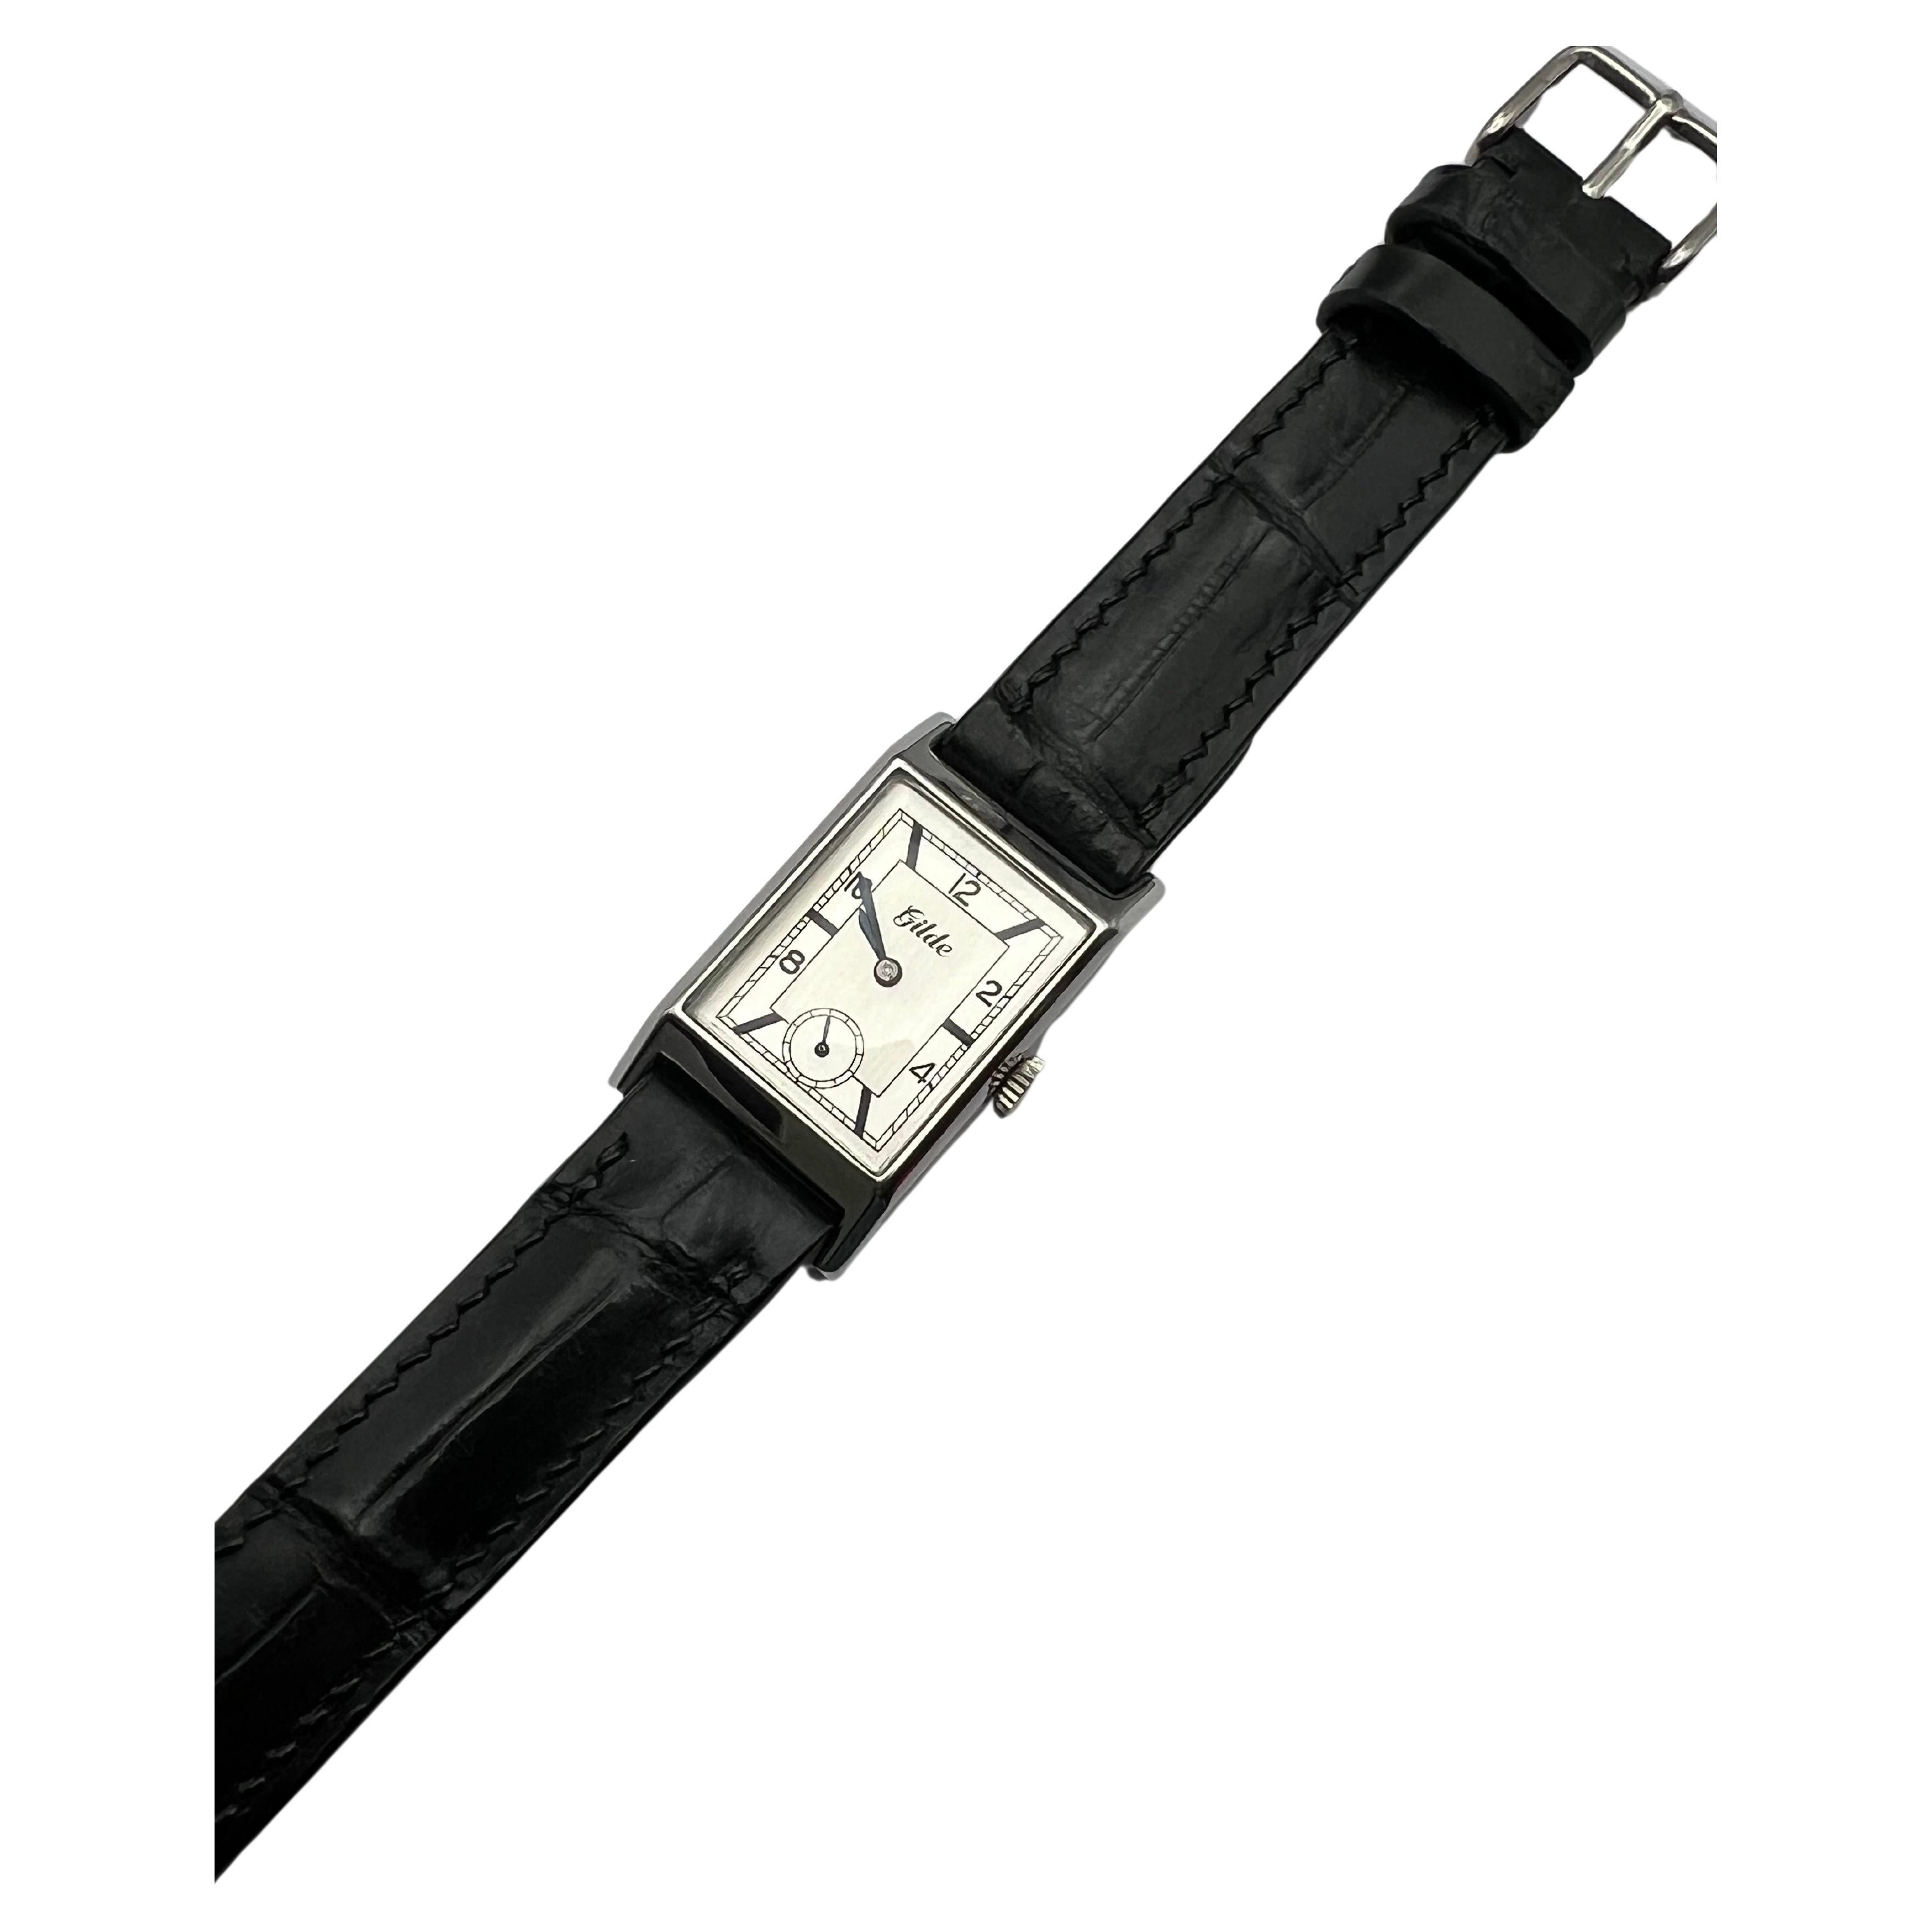 Do Gruen watches have any value?